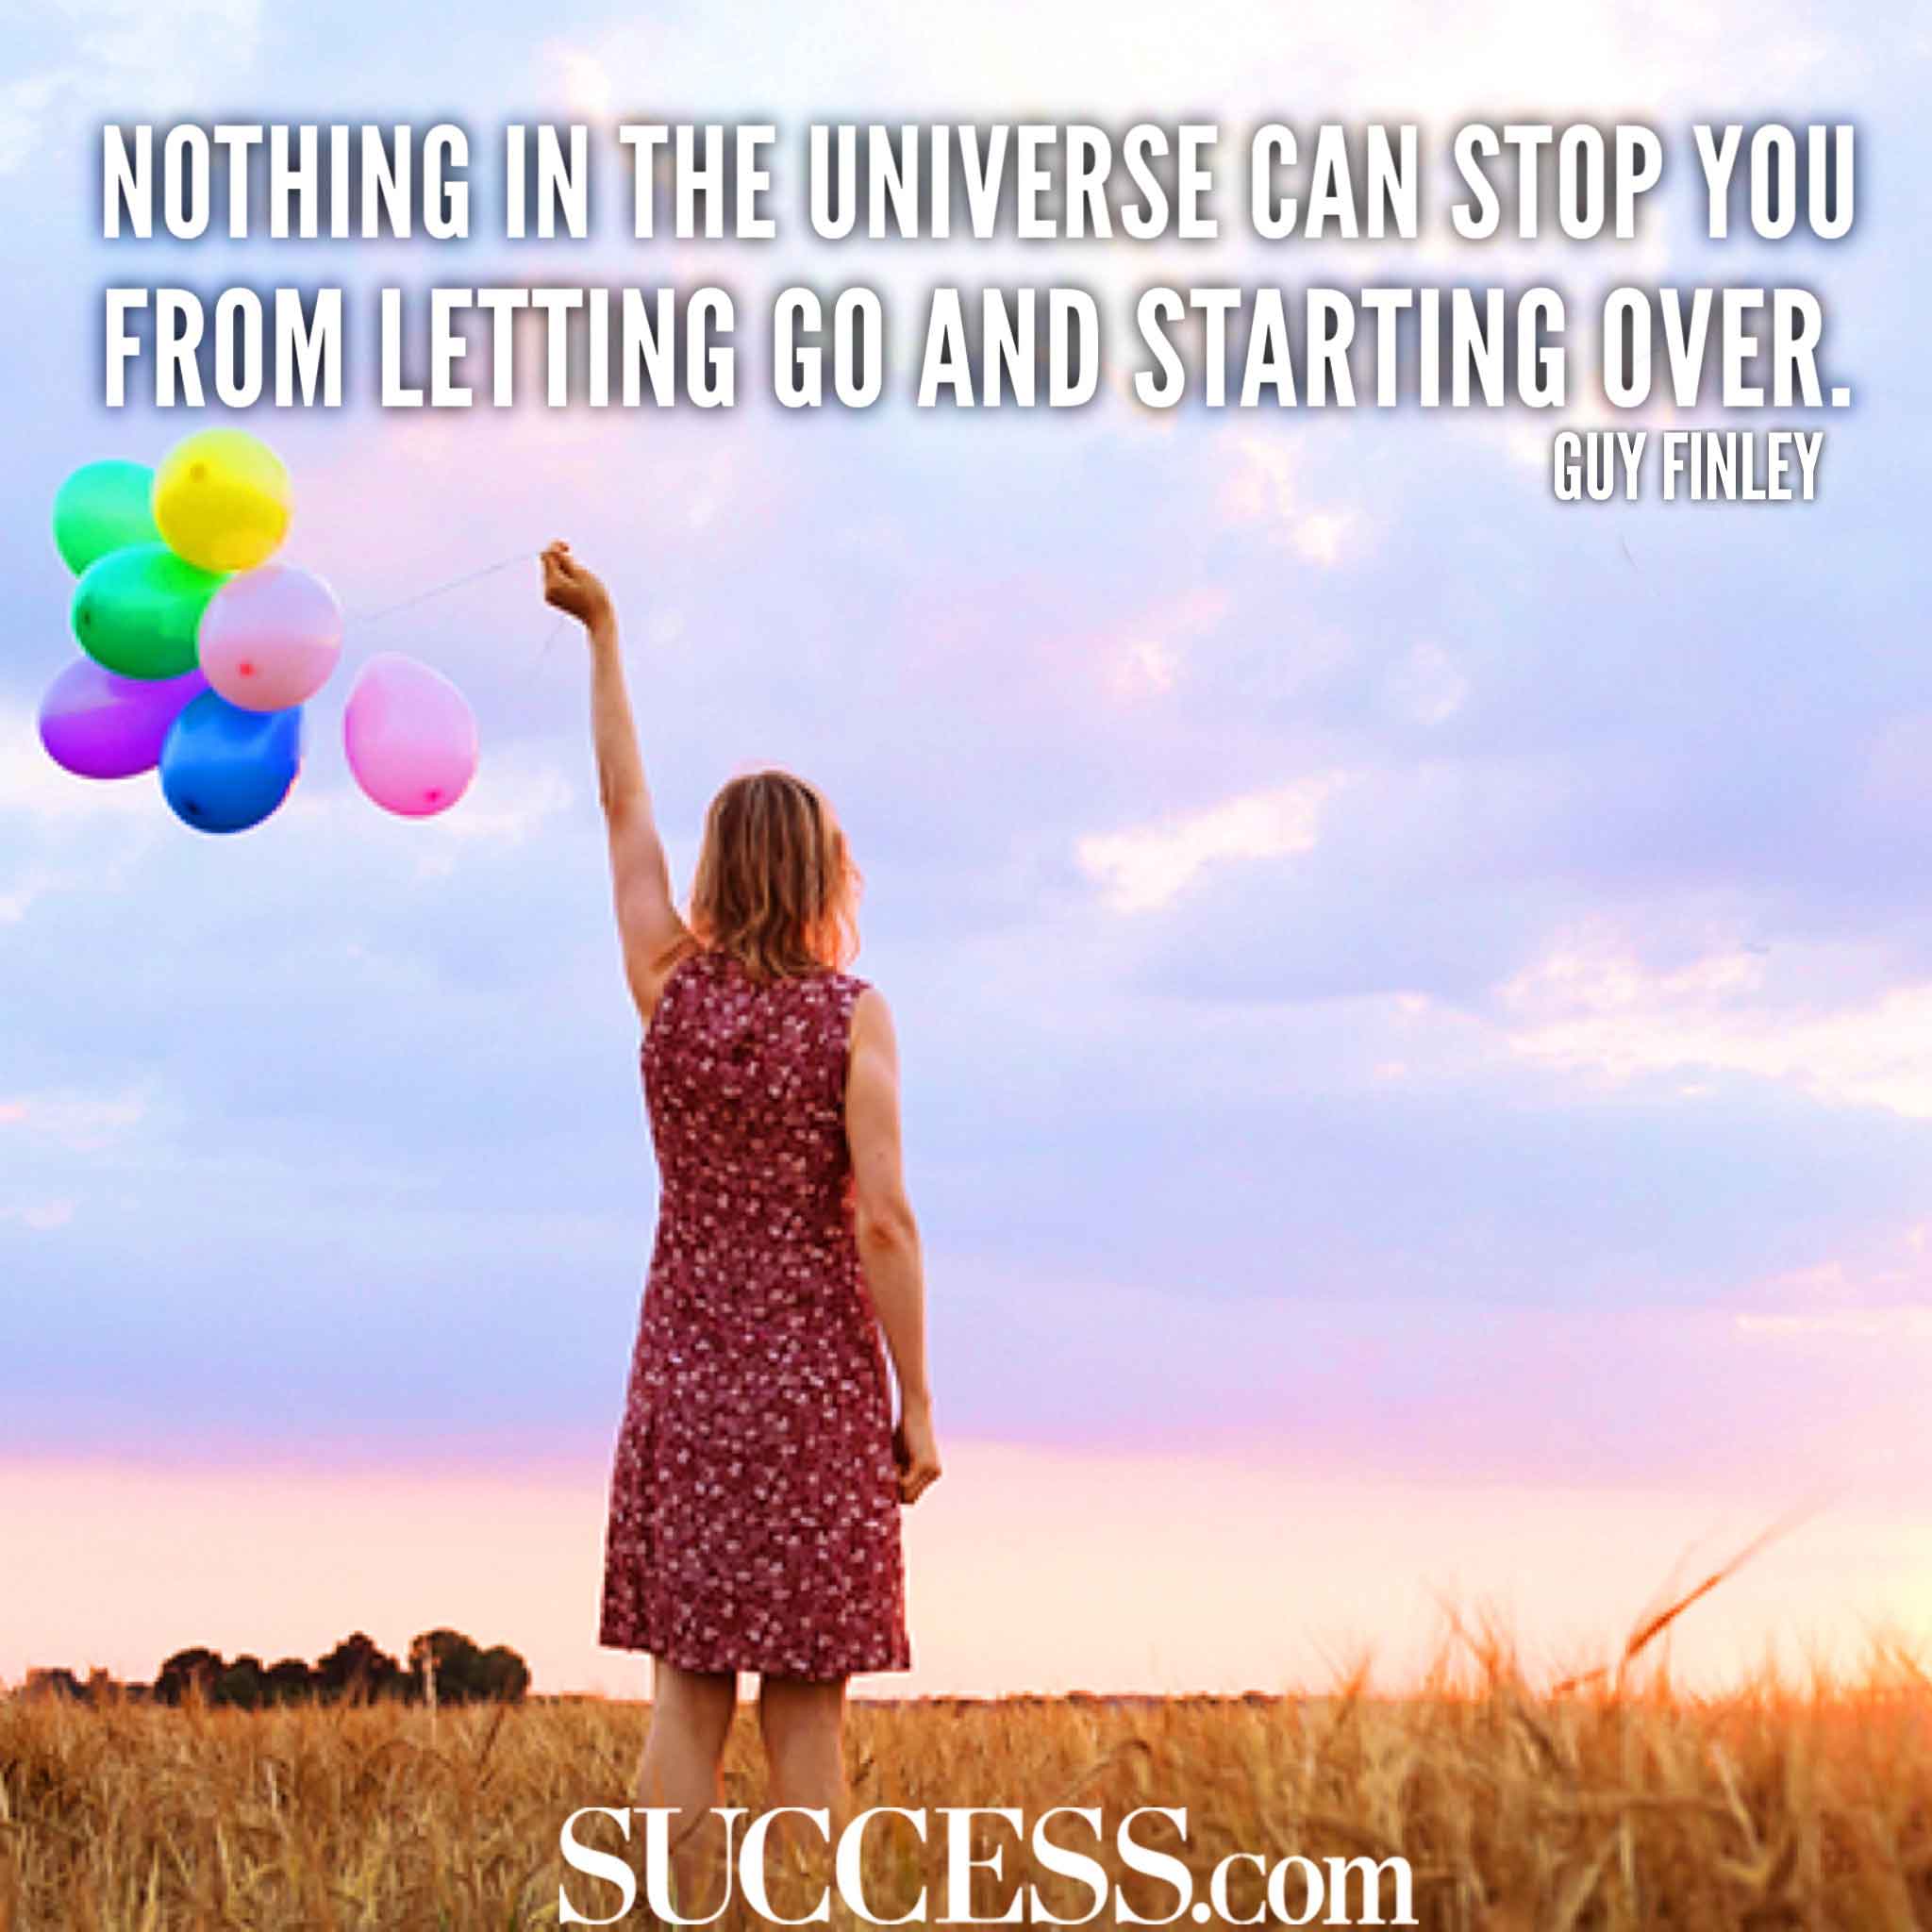 51 Uplifting New Beginning Quotes for Your Fresh Start - She Owns